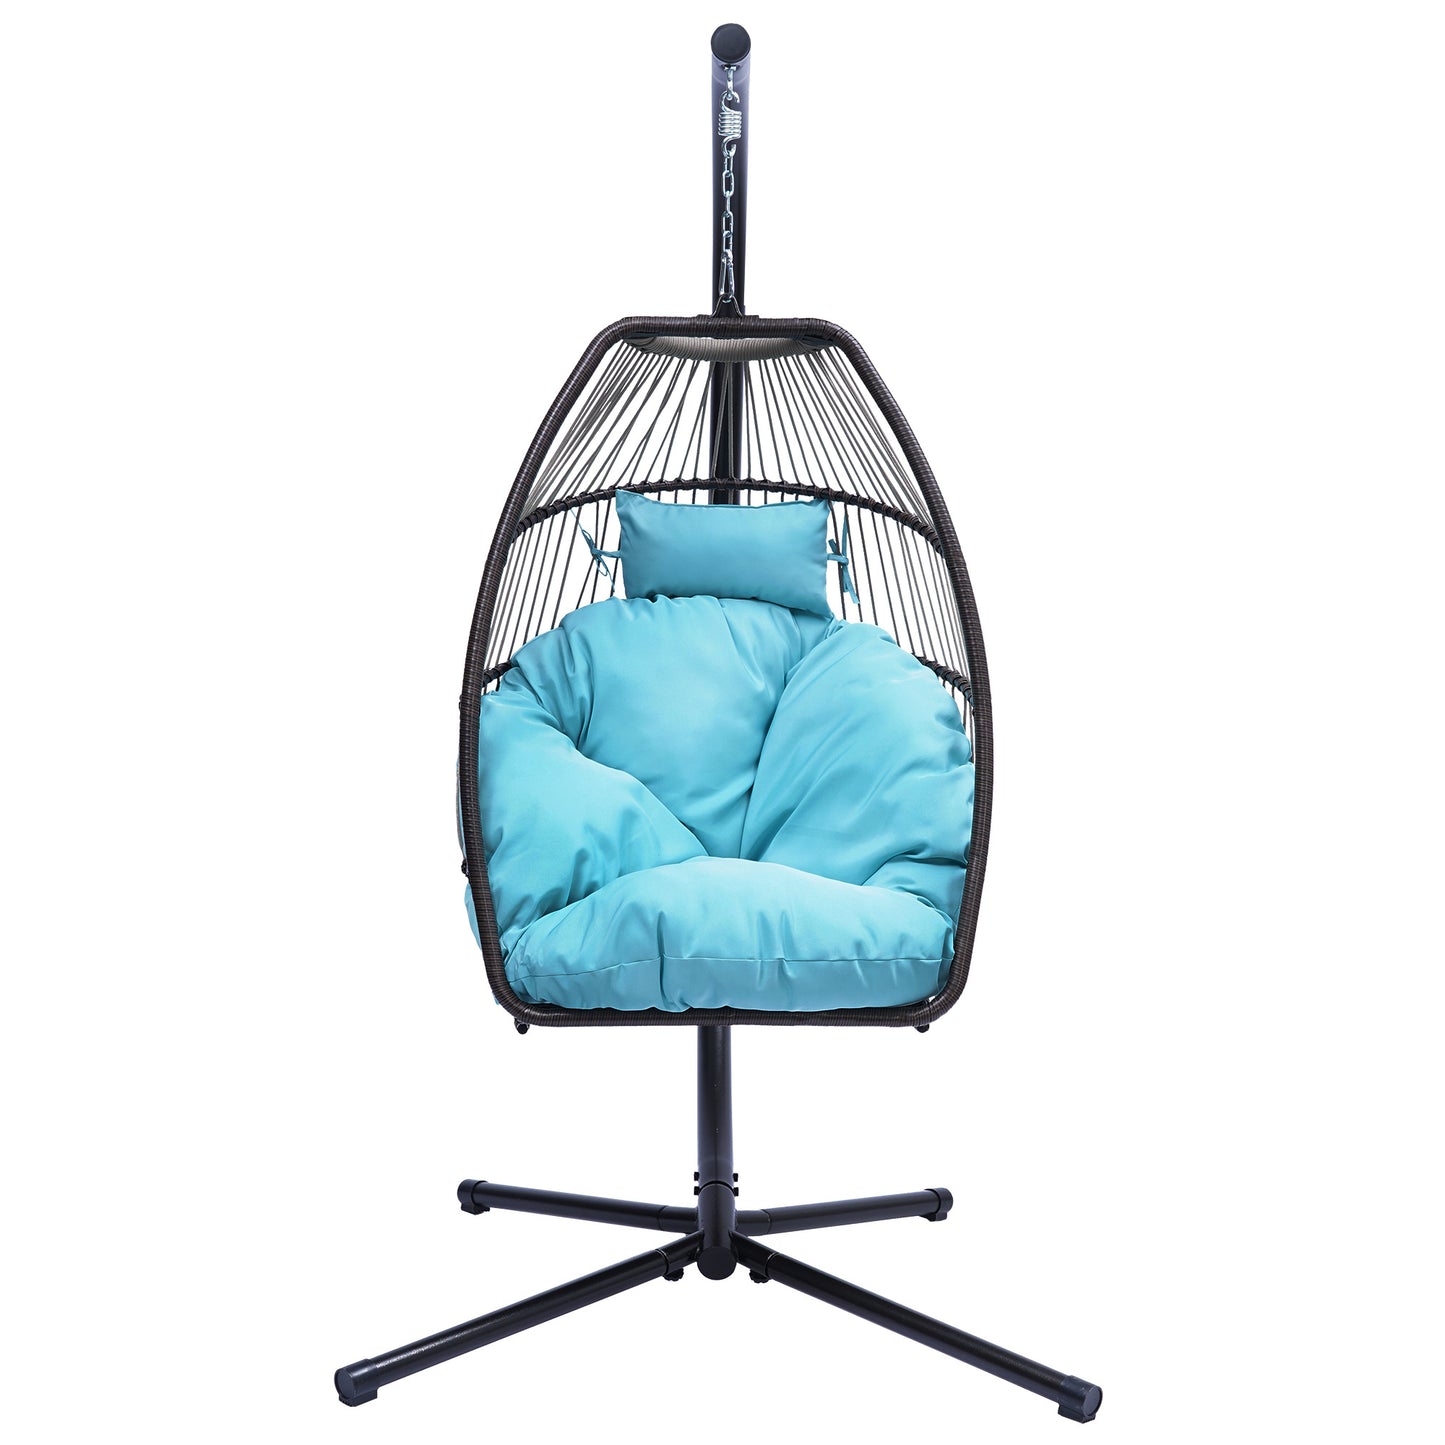 Hanging Egg Chair with Stand